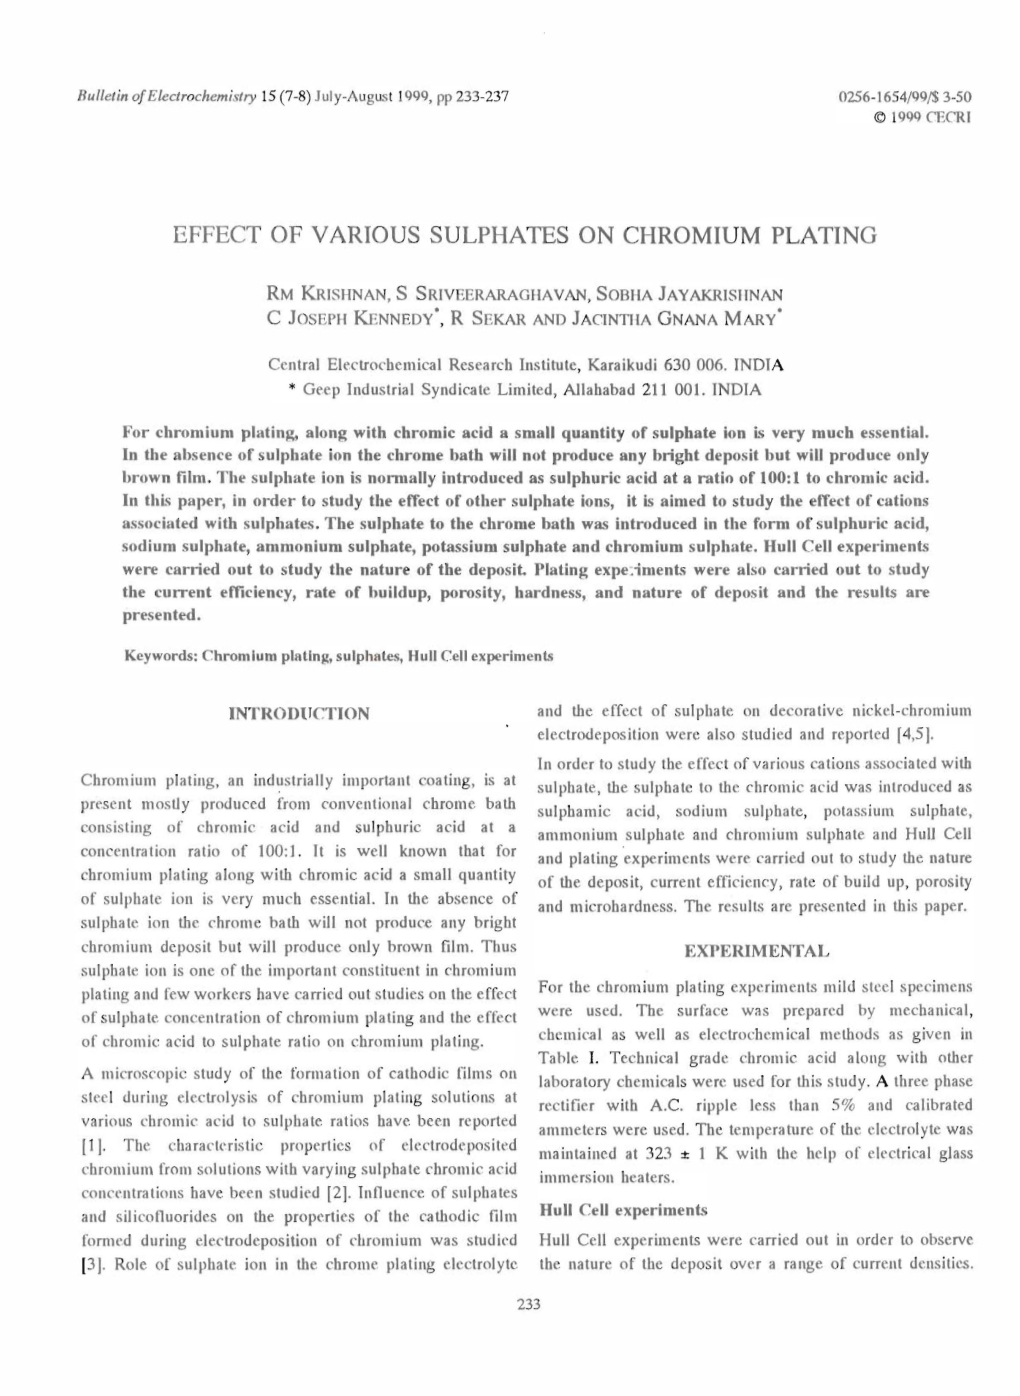 Effect of Various Sulphates on Chromium Plating